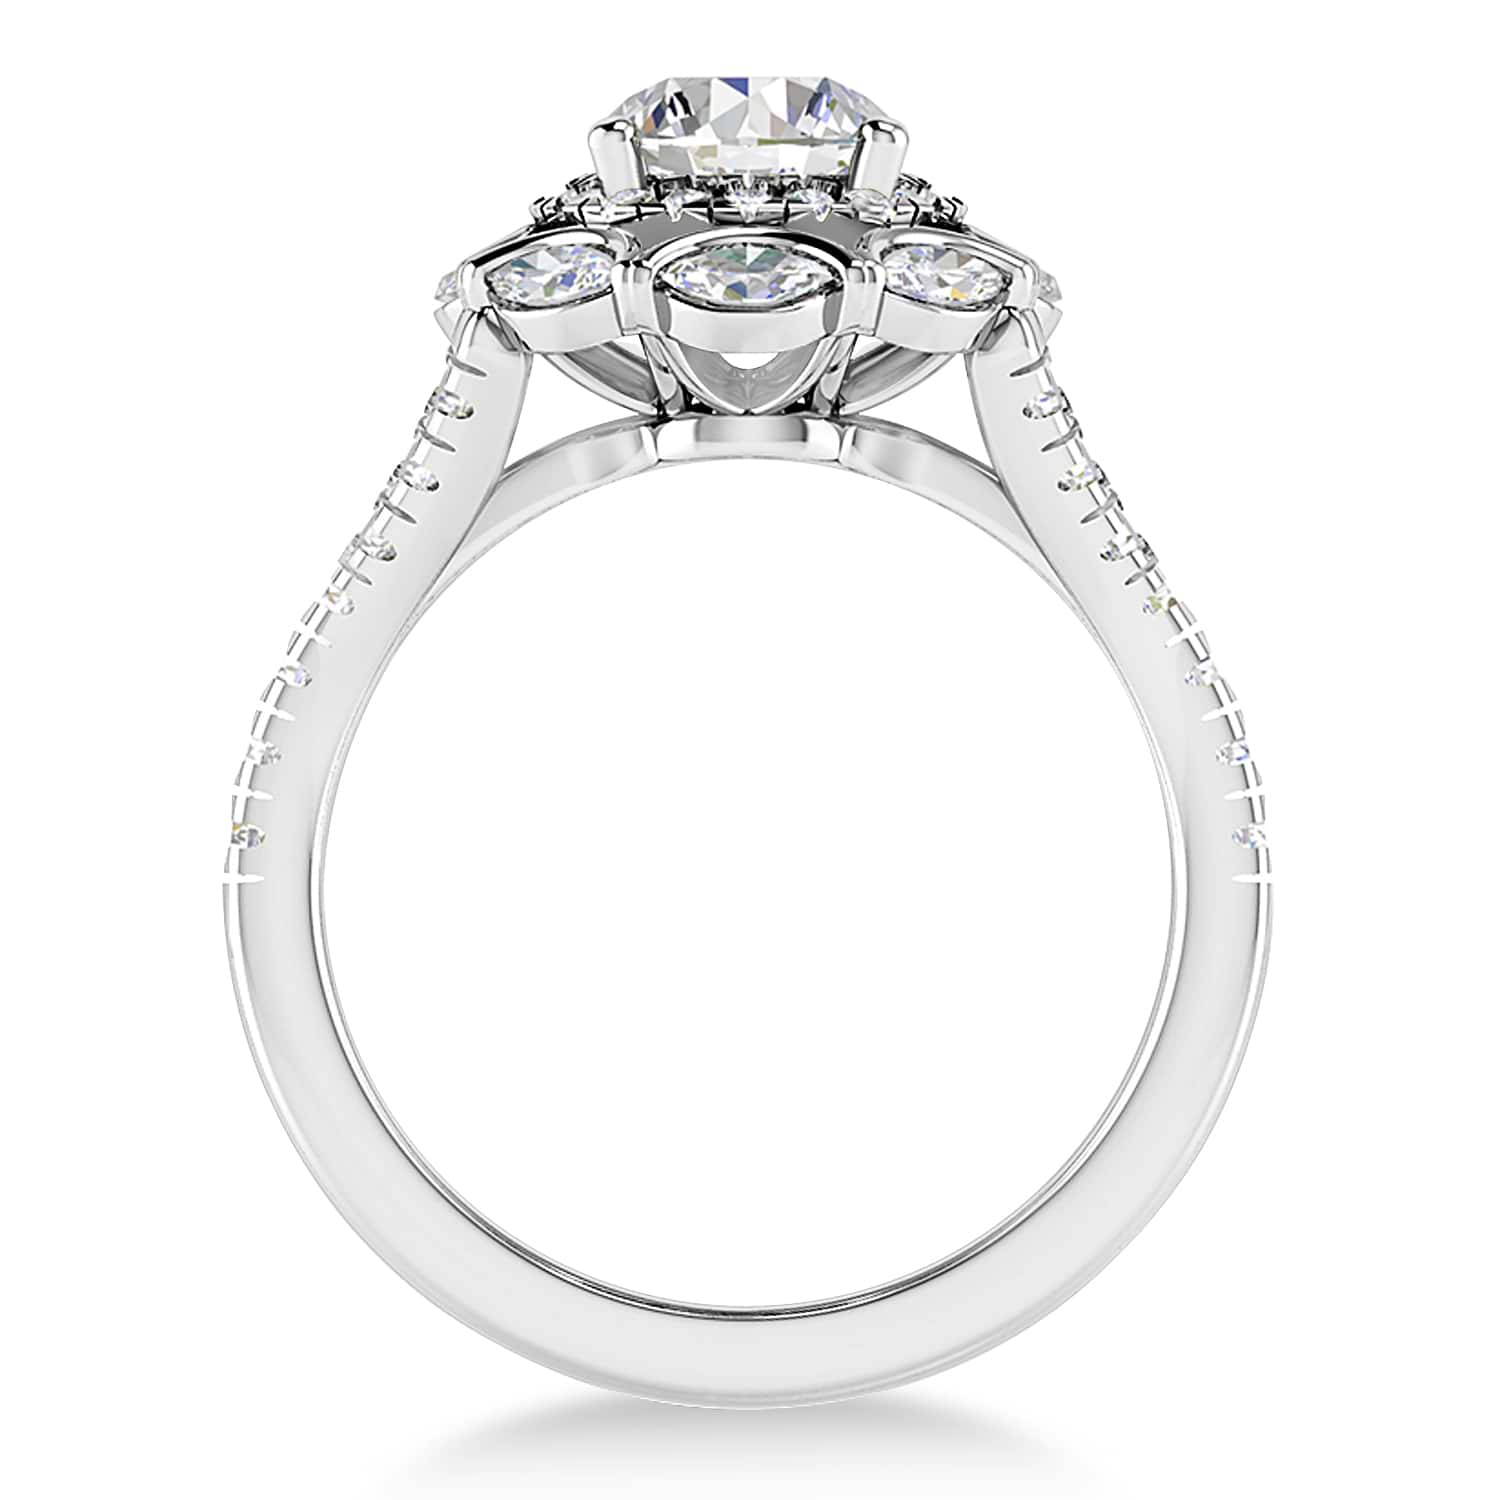 Diamond Accented Halo Engagement Ring 14k White Gold (0.92ct)